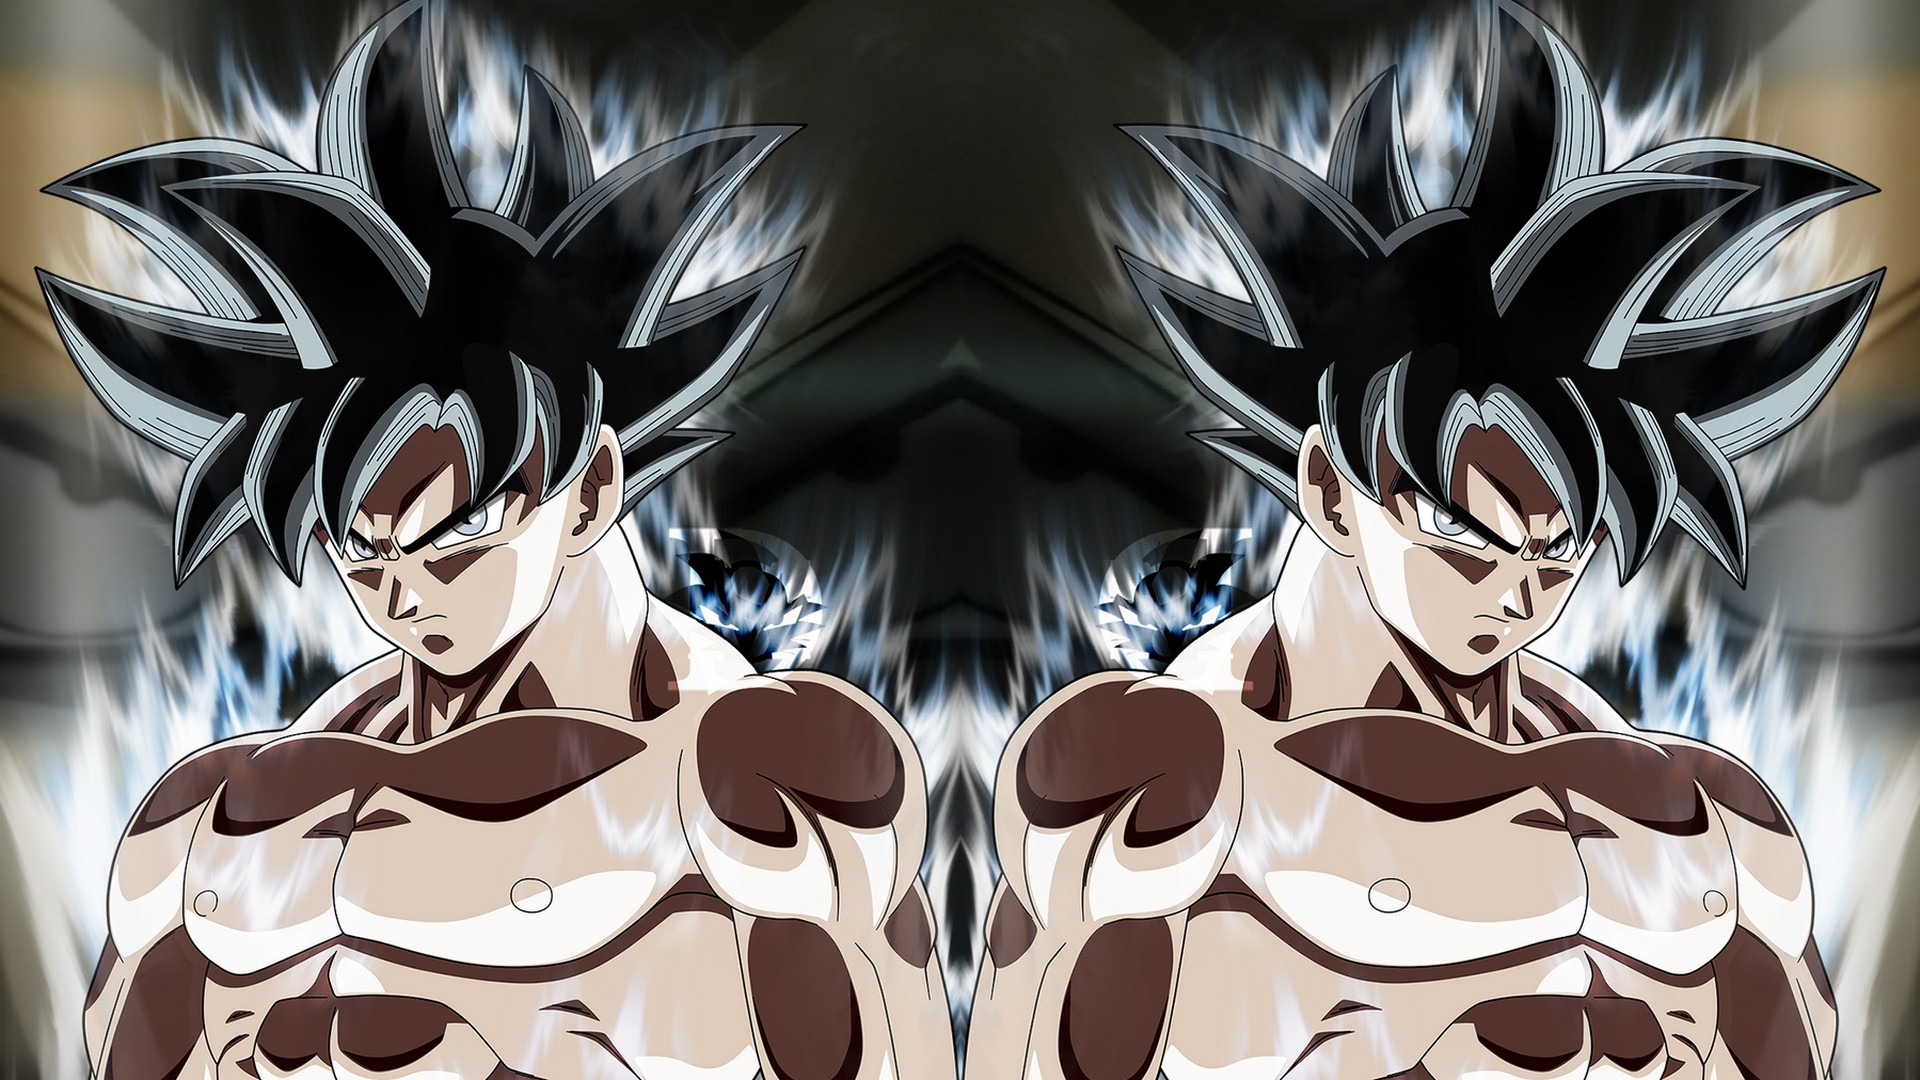 Wallpapers Goku Images with image resolution 1920x1080 pixel. You can make this wallpaper for your Desktop Computer Backgrounds, Mac Wallpapers, Android Lock screen or iPhone Screensavers